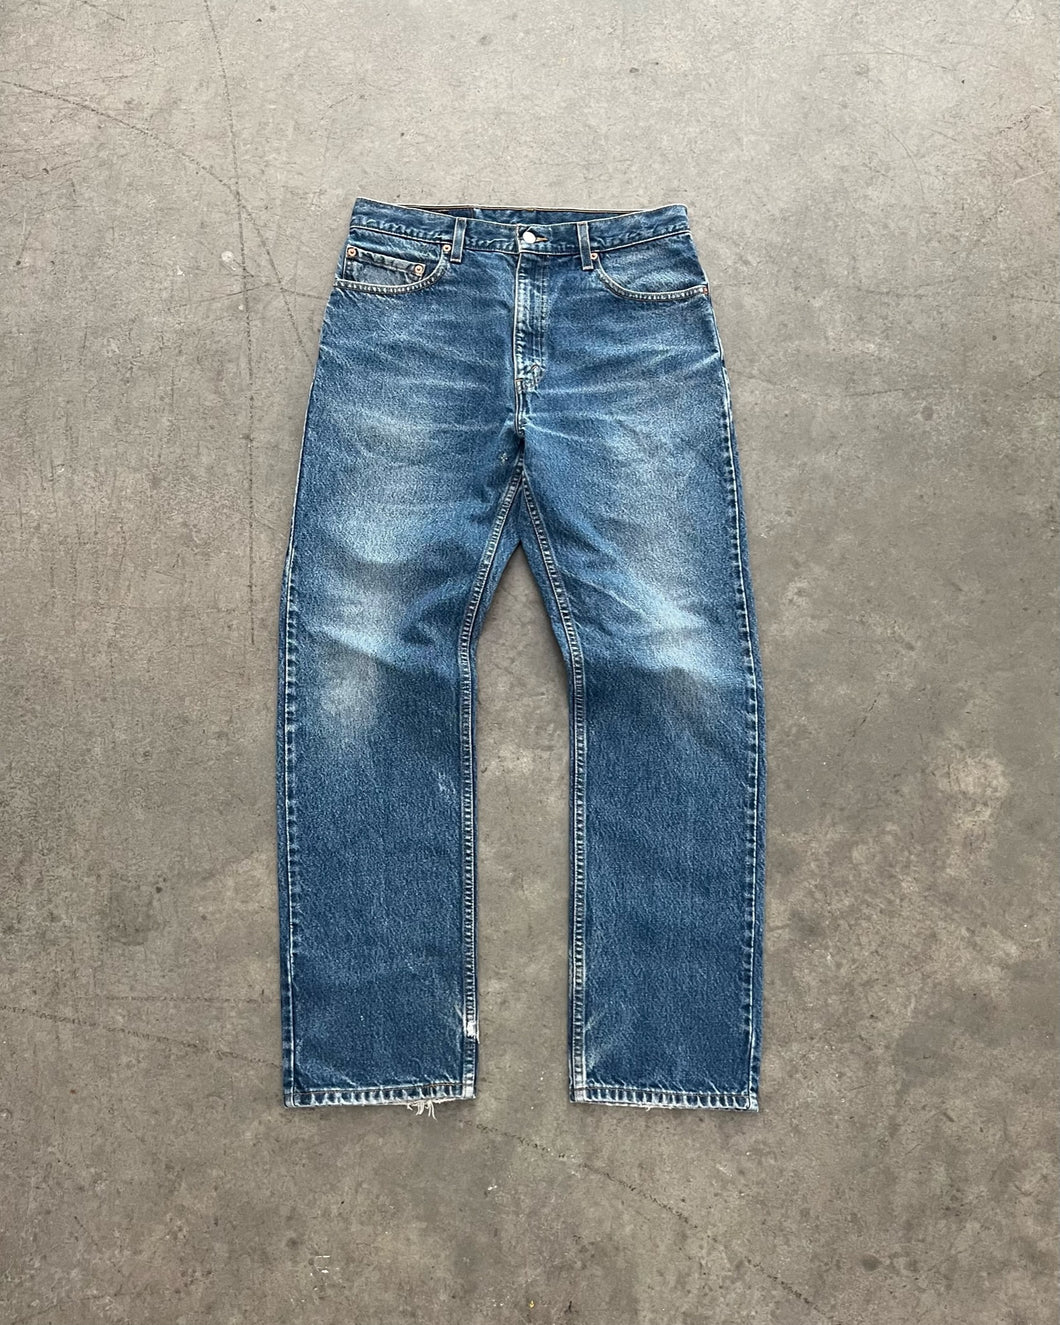 LEVI’S 505 FADED BLUE JEANS - 1990S